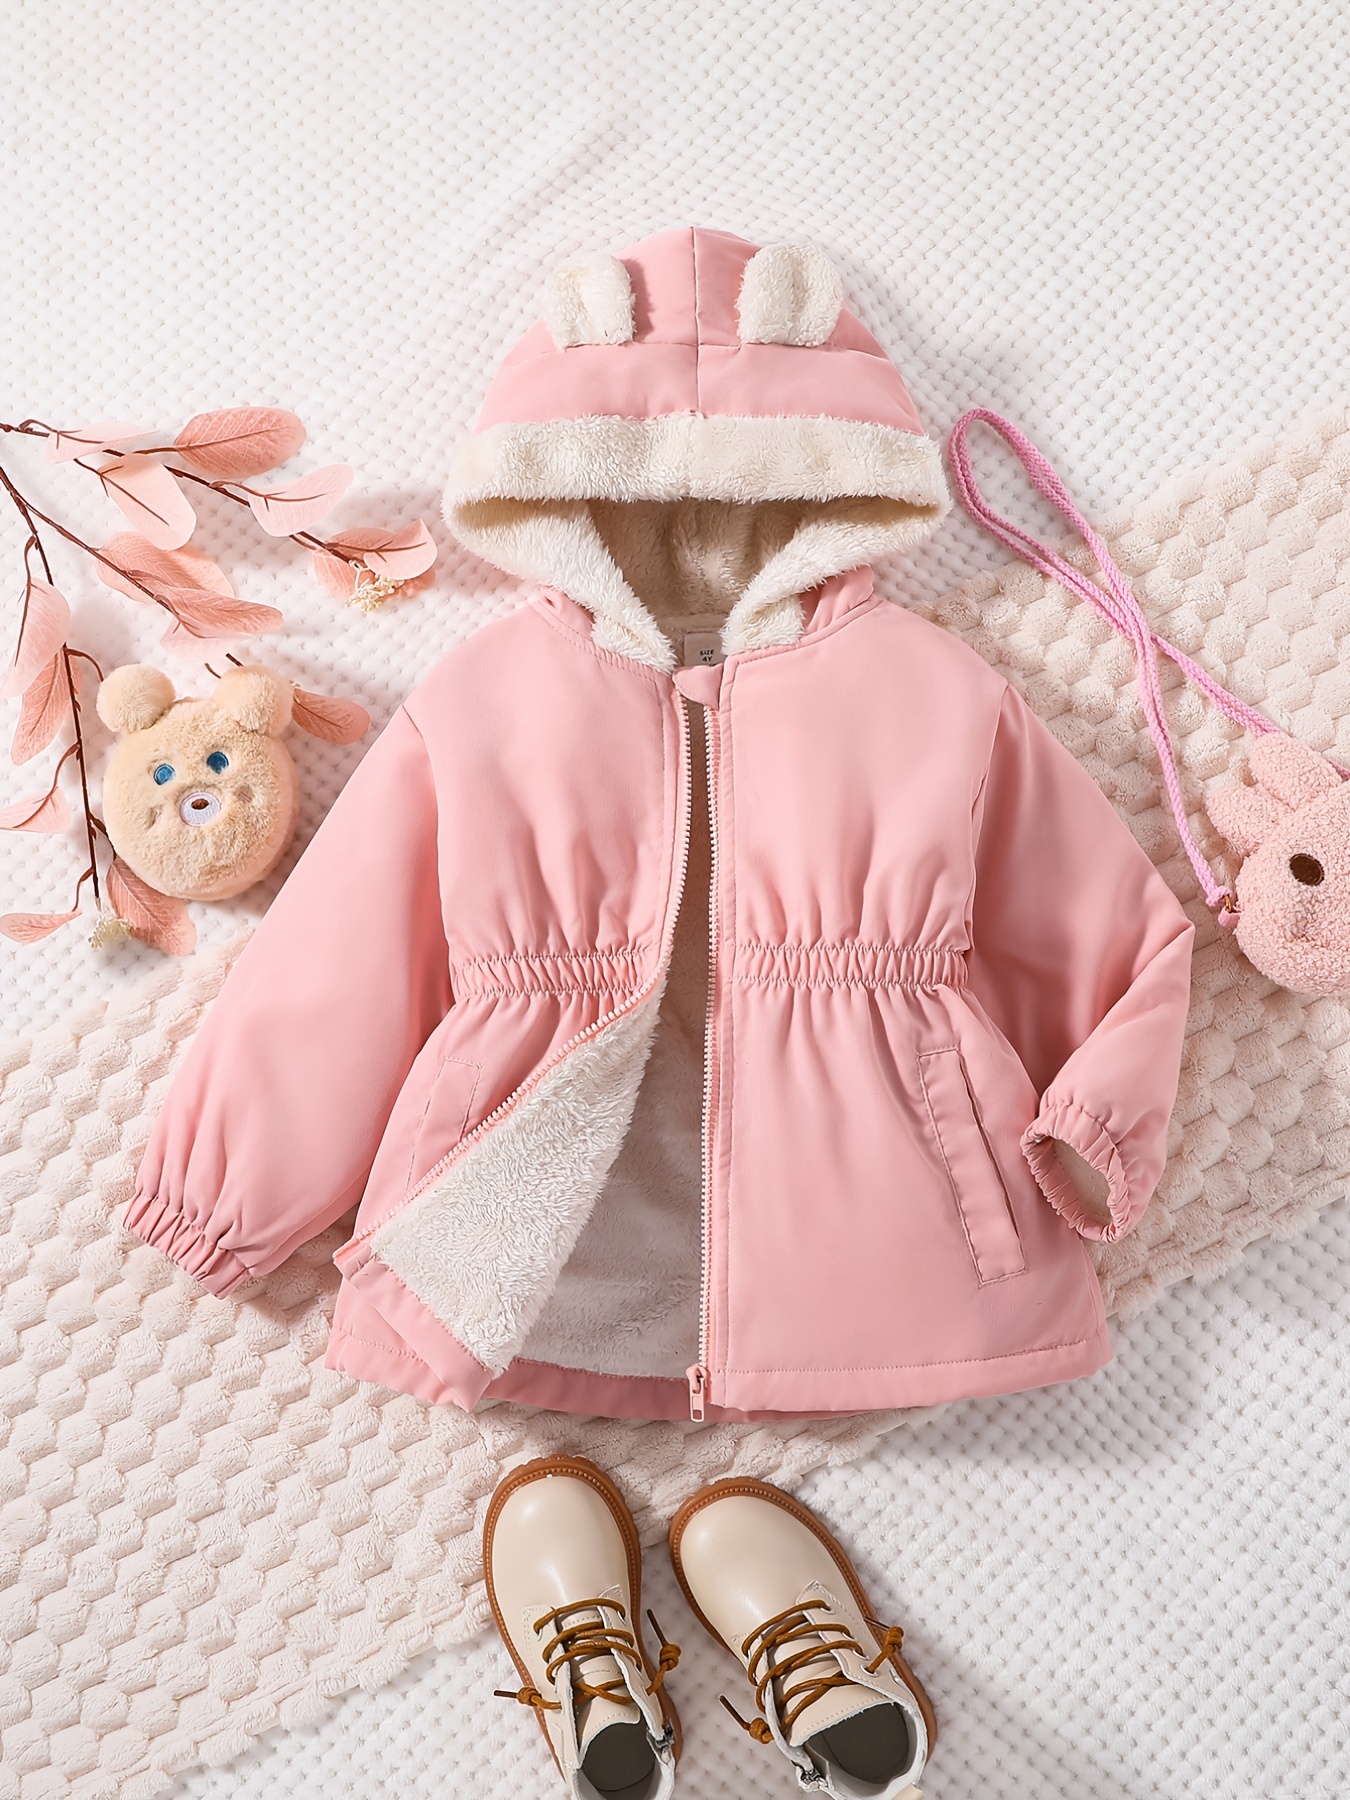 Girls Cute Bunny Ears Design Thermal Fleece Lined Tunic Coat, Kids Clothing  For Winter, Gift Idea